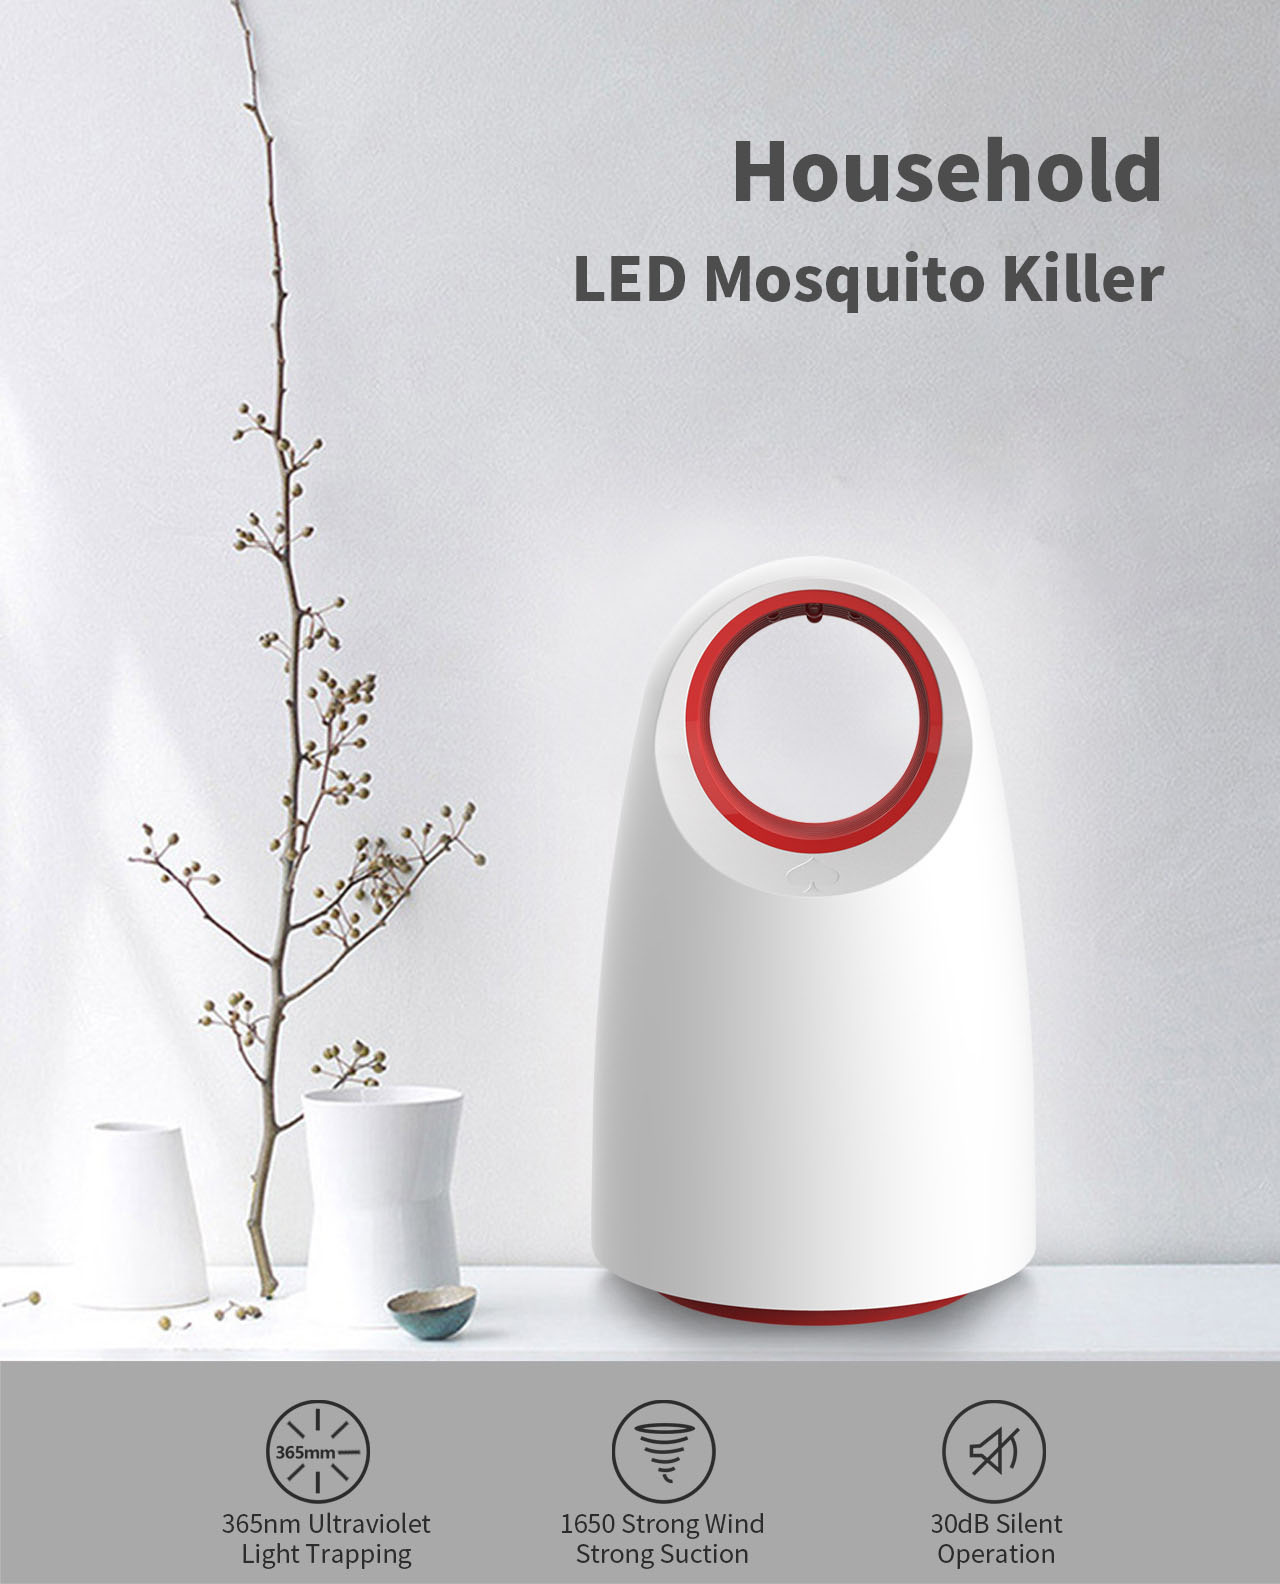 Household-LED-Mosquito-Killer-Electric-Insect-Killer-Lamp-USB-Electronics-Anti-Mosquito-Trap-LED-Nig-1440223-1